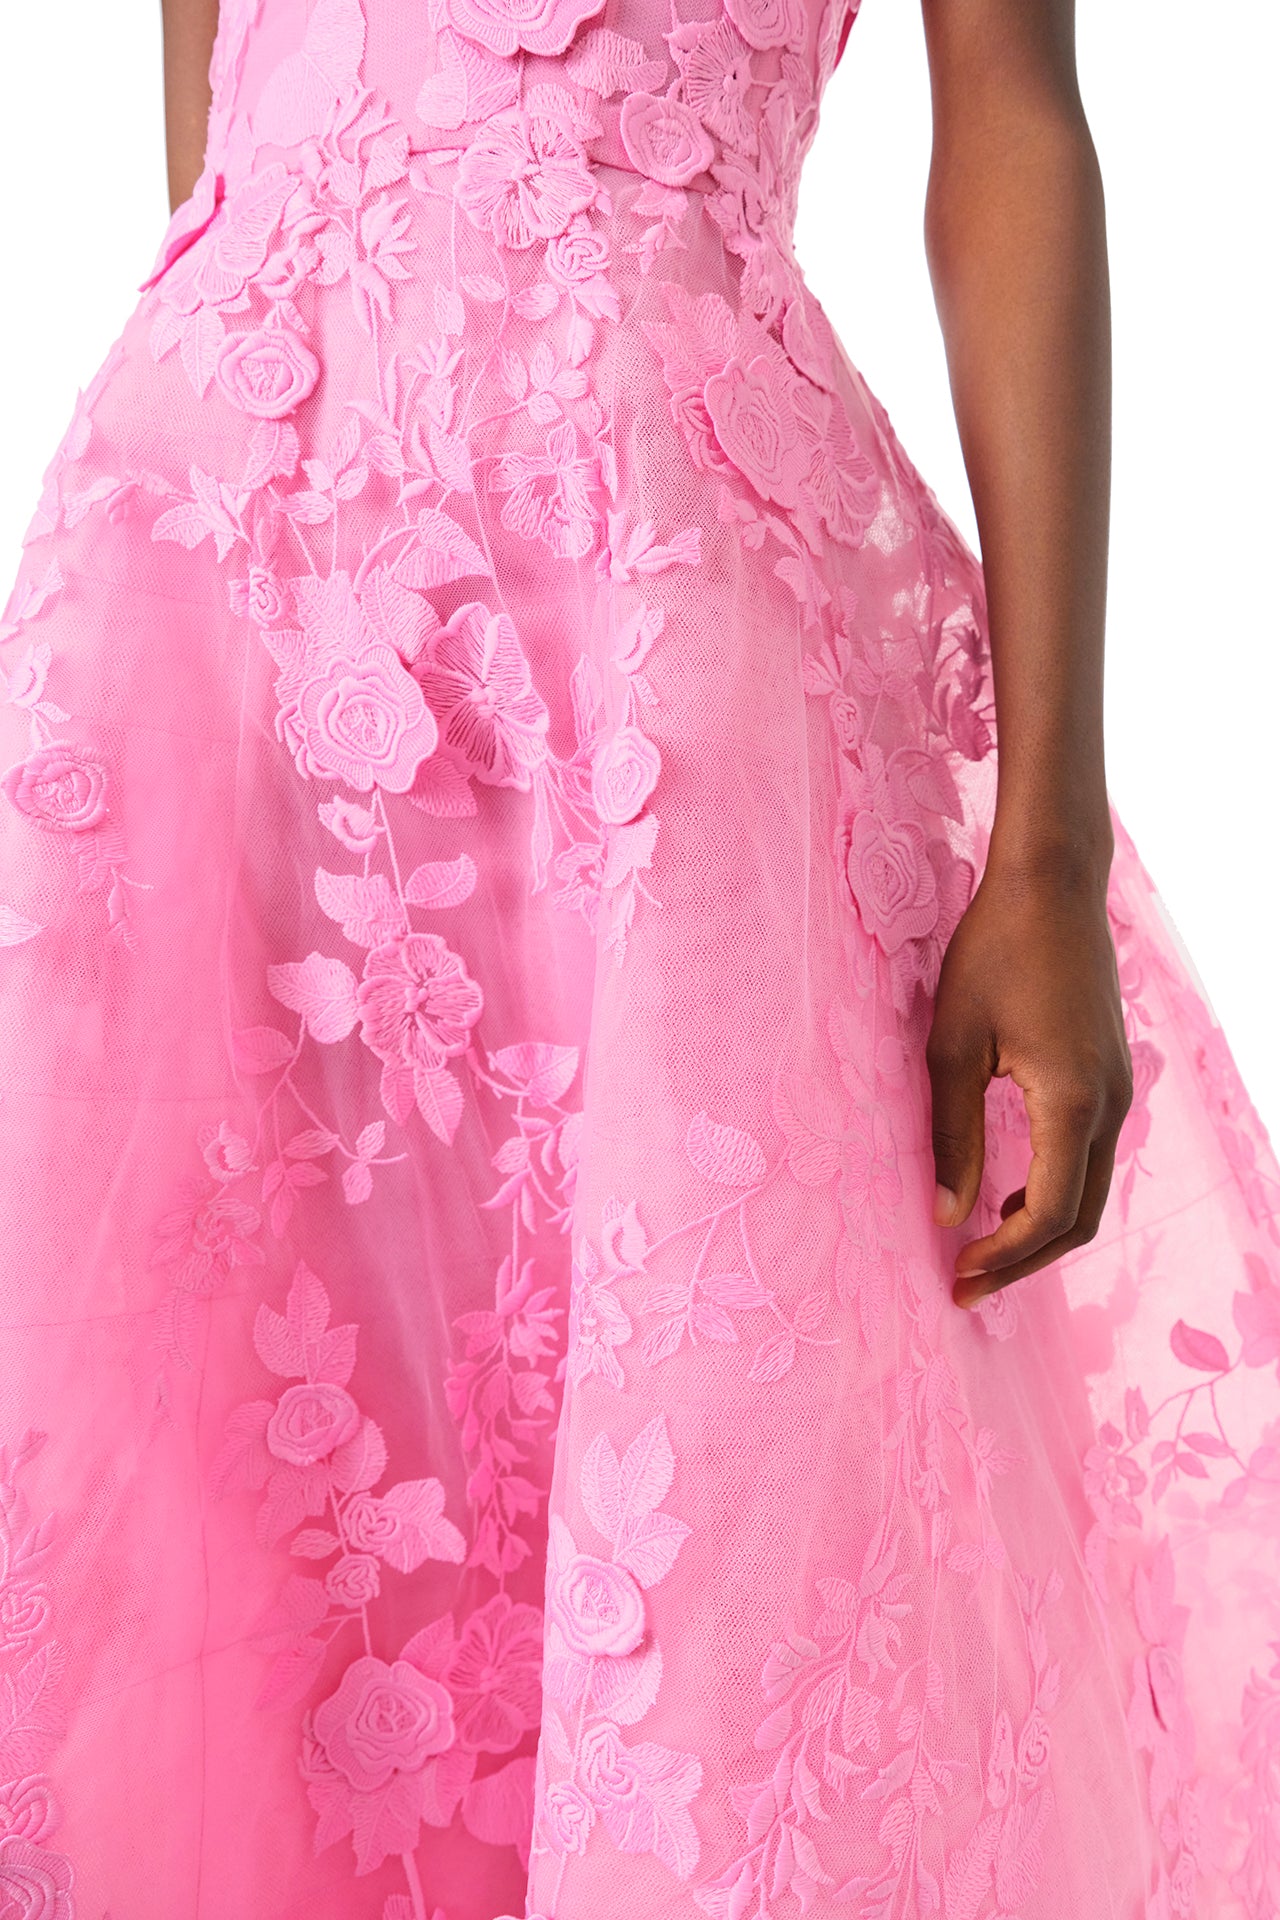 Monique Lhuillier Fall 2024 tea-length, strapless dress in pink 3D lace with full skirt and fitted sweetheart bodice - fabric detail.